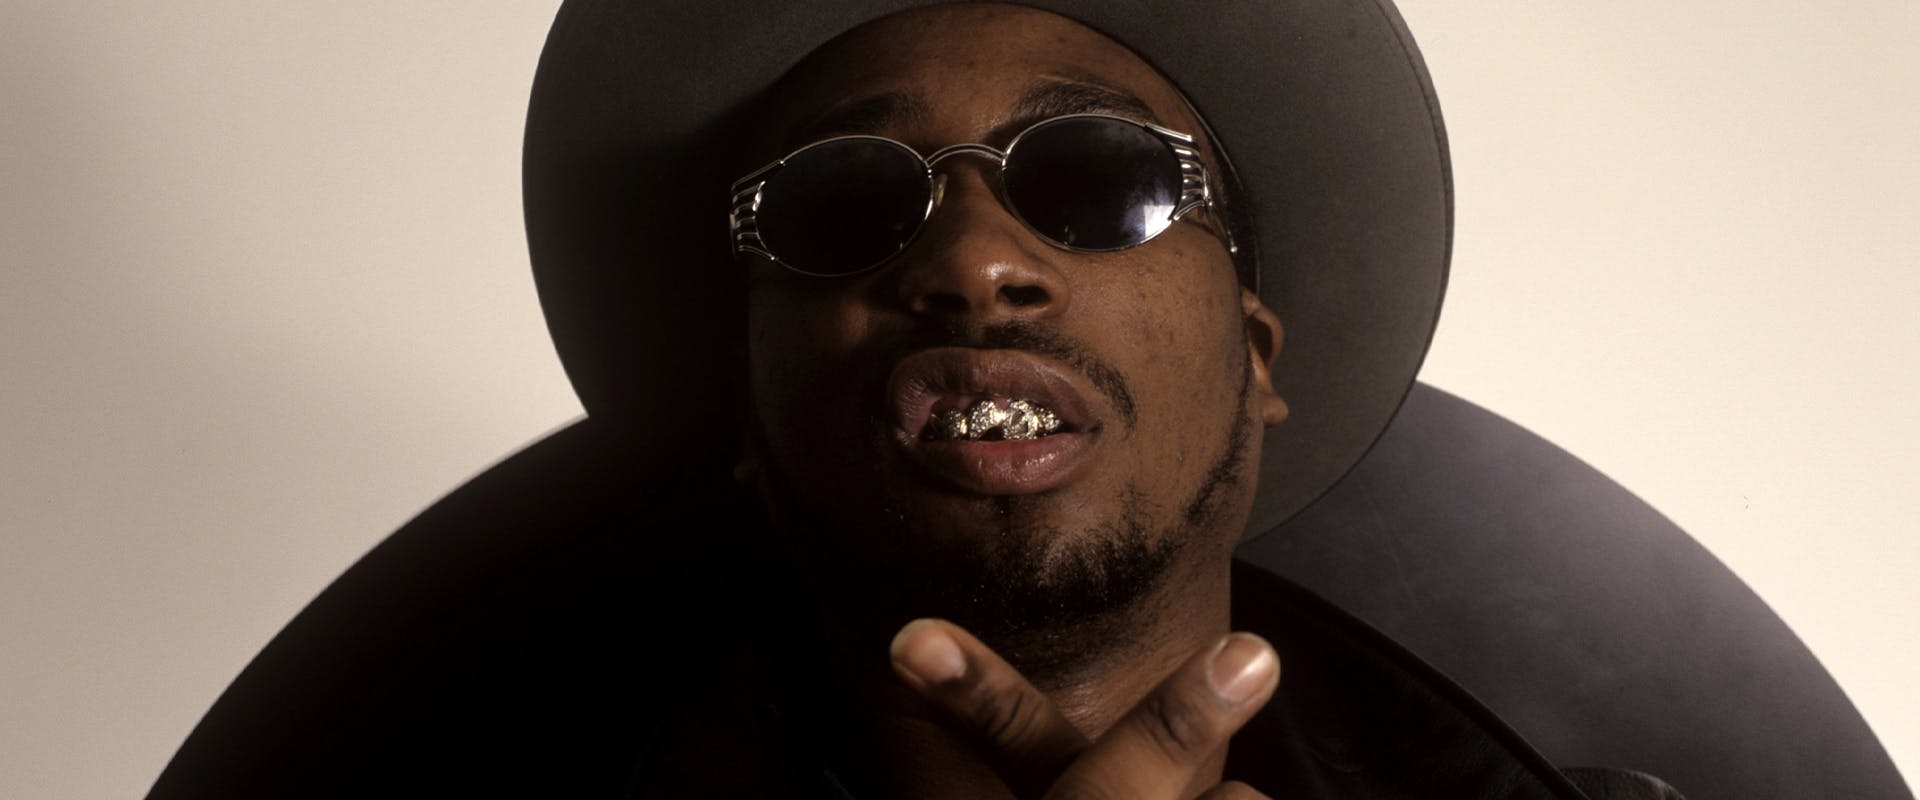 American rap artist ODB (Ol' Dirty Bastard) of the rap group Wu-Tang Clan poses for a February 1997 portrait in New York City, New York. 